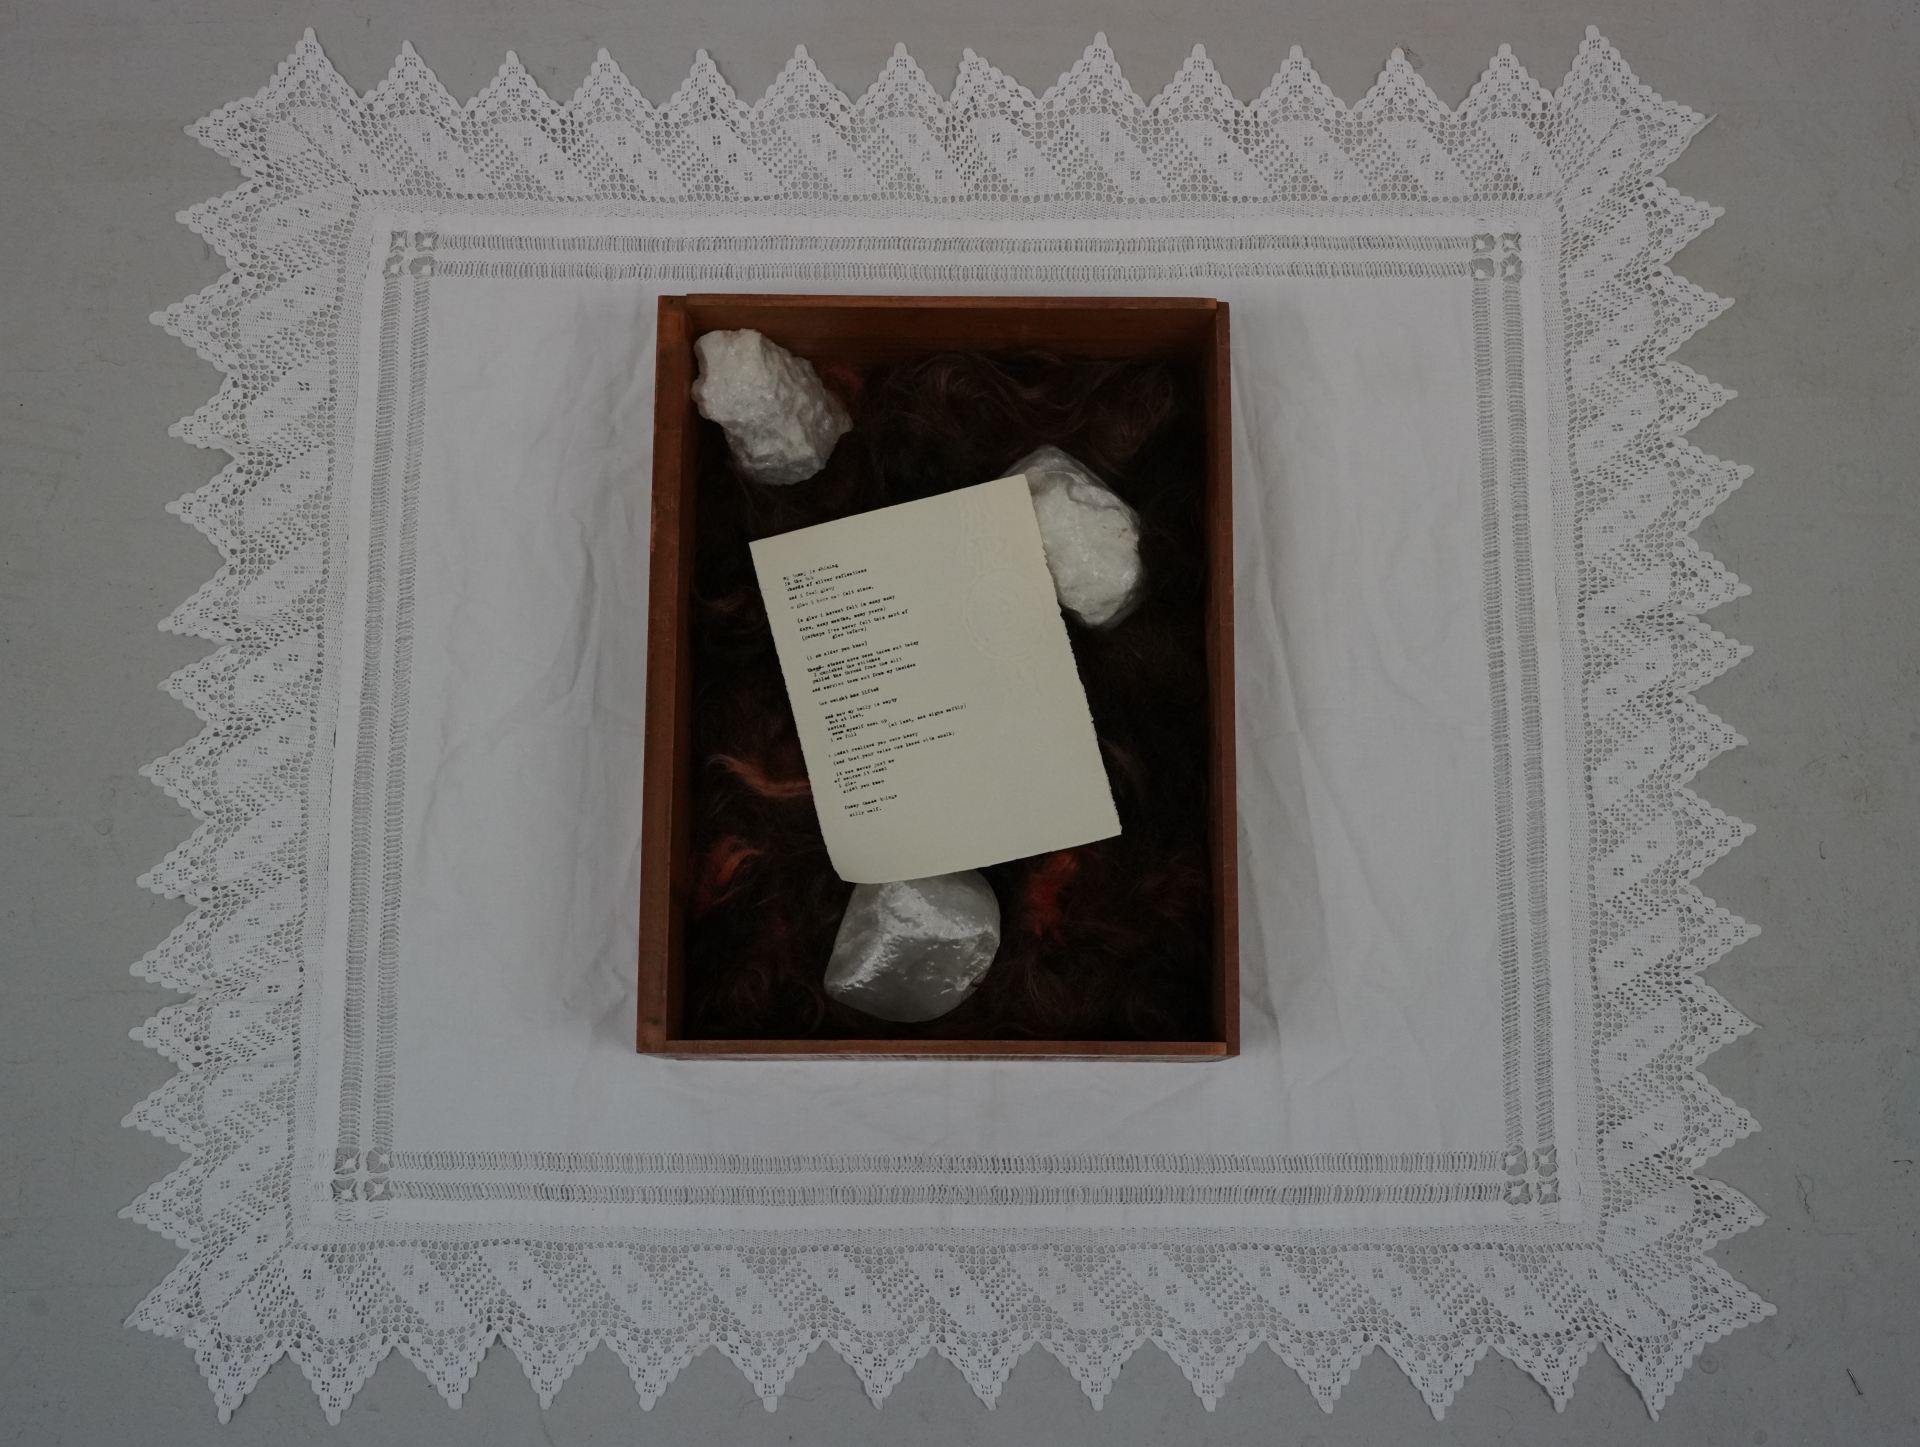 A bird's eye view of a box containing 3D printed stones and a handwritten note.